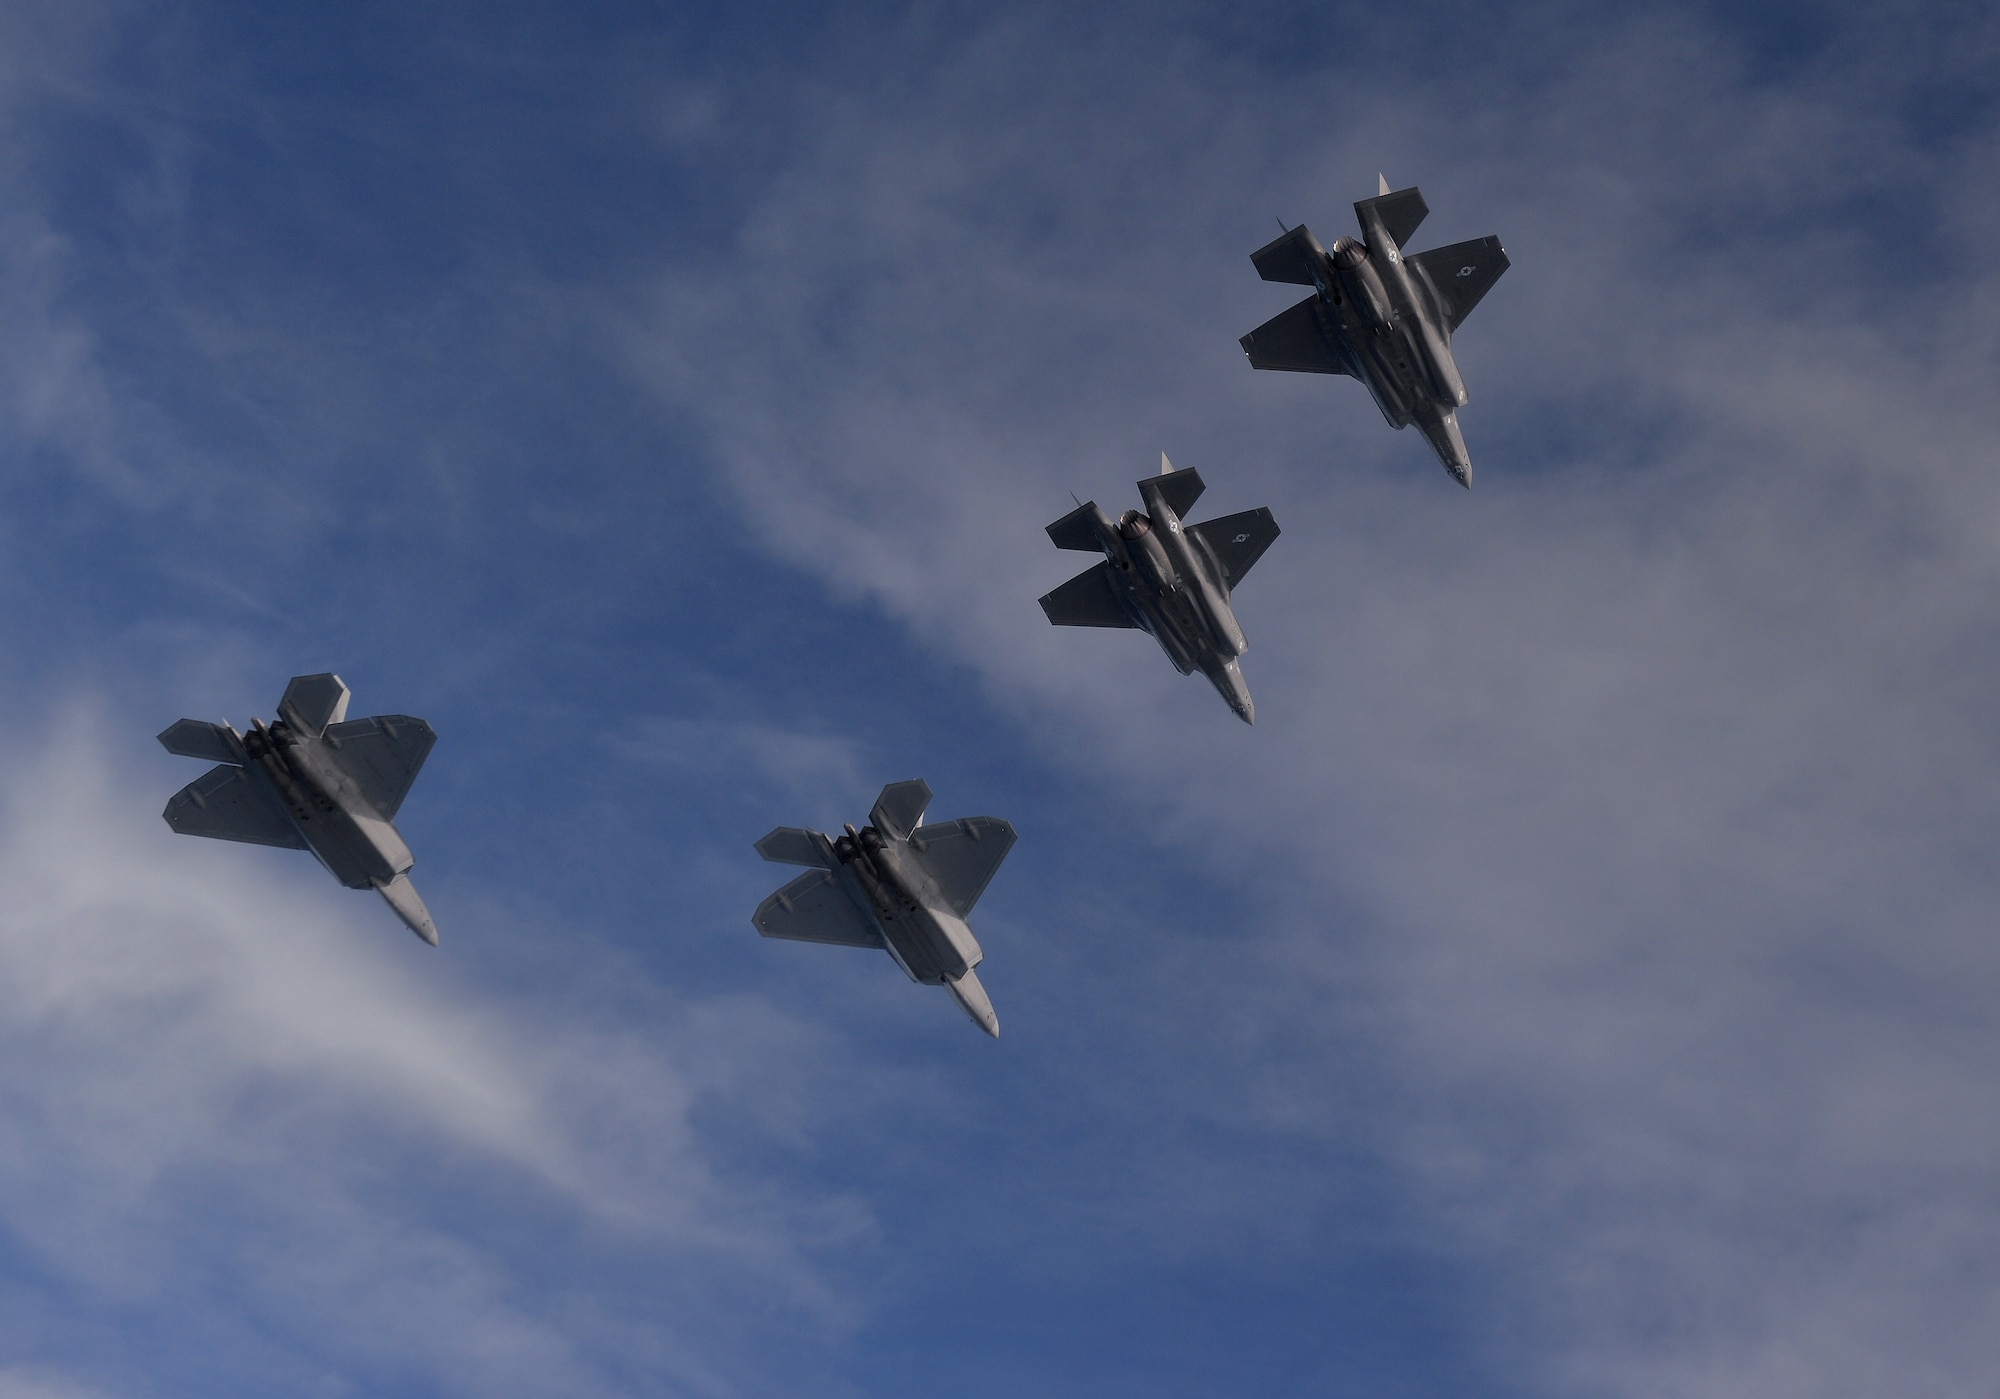 F-22 Raptors from the 94th Fighter Squadron, Joint Base Langley-Eustis, Virginia, and F-35A Lightning IIs from the 58th Fighter Squadron, Eglin Air Force Base, Florida, fly in formation after completing an integration training mission over the Eglin Training Range, Florida, Nov. 5, 2014.  The F-35s and F-22s flew offensive counter air, defensive counter air and interdiction missions, maximizing effects by employing fifth-generation capabilities together. (U.S. Air Force photo/Master Sgt. Shane A. Cuomo)